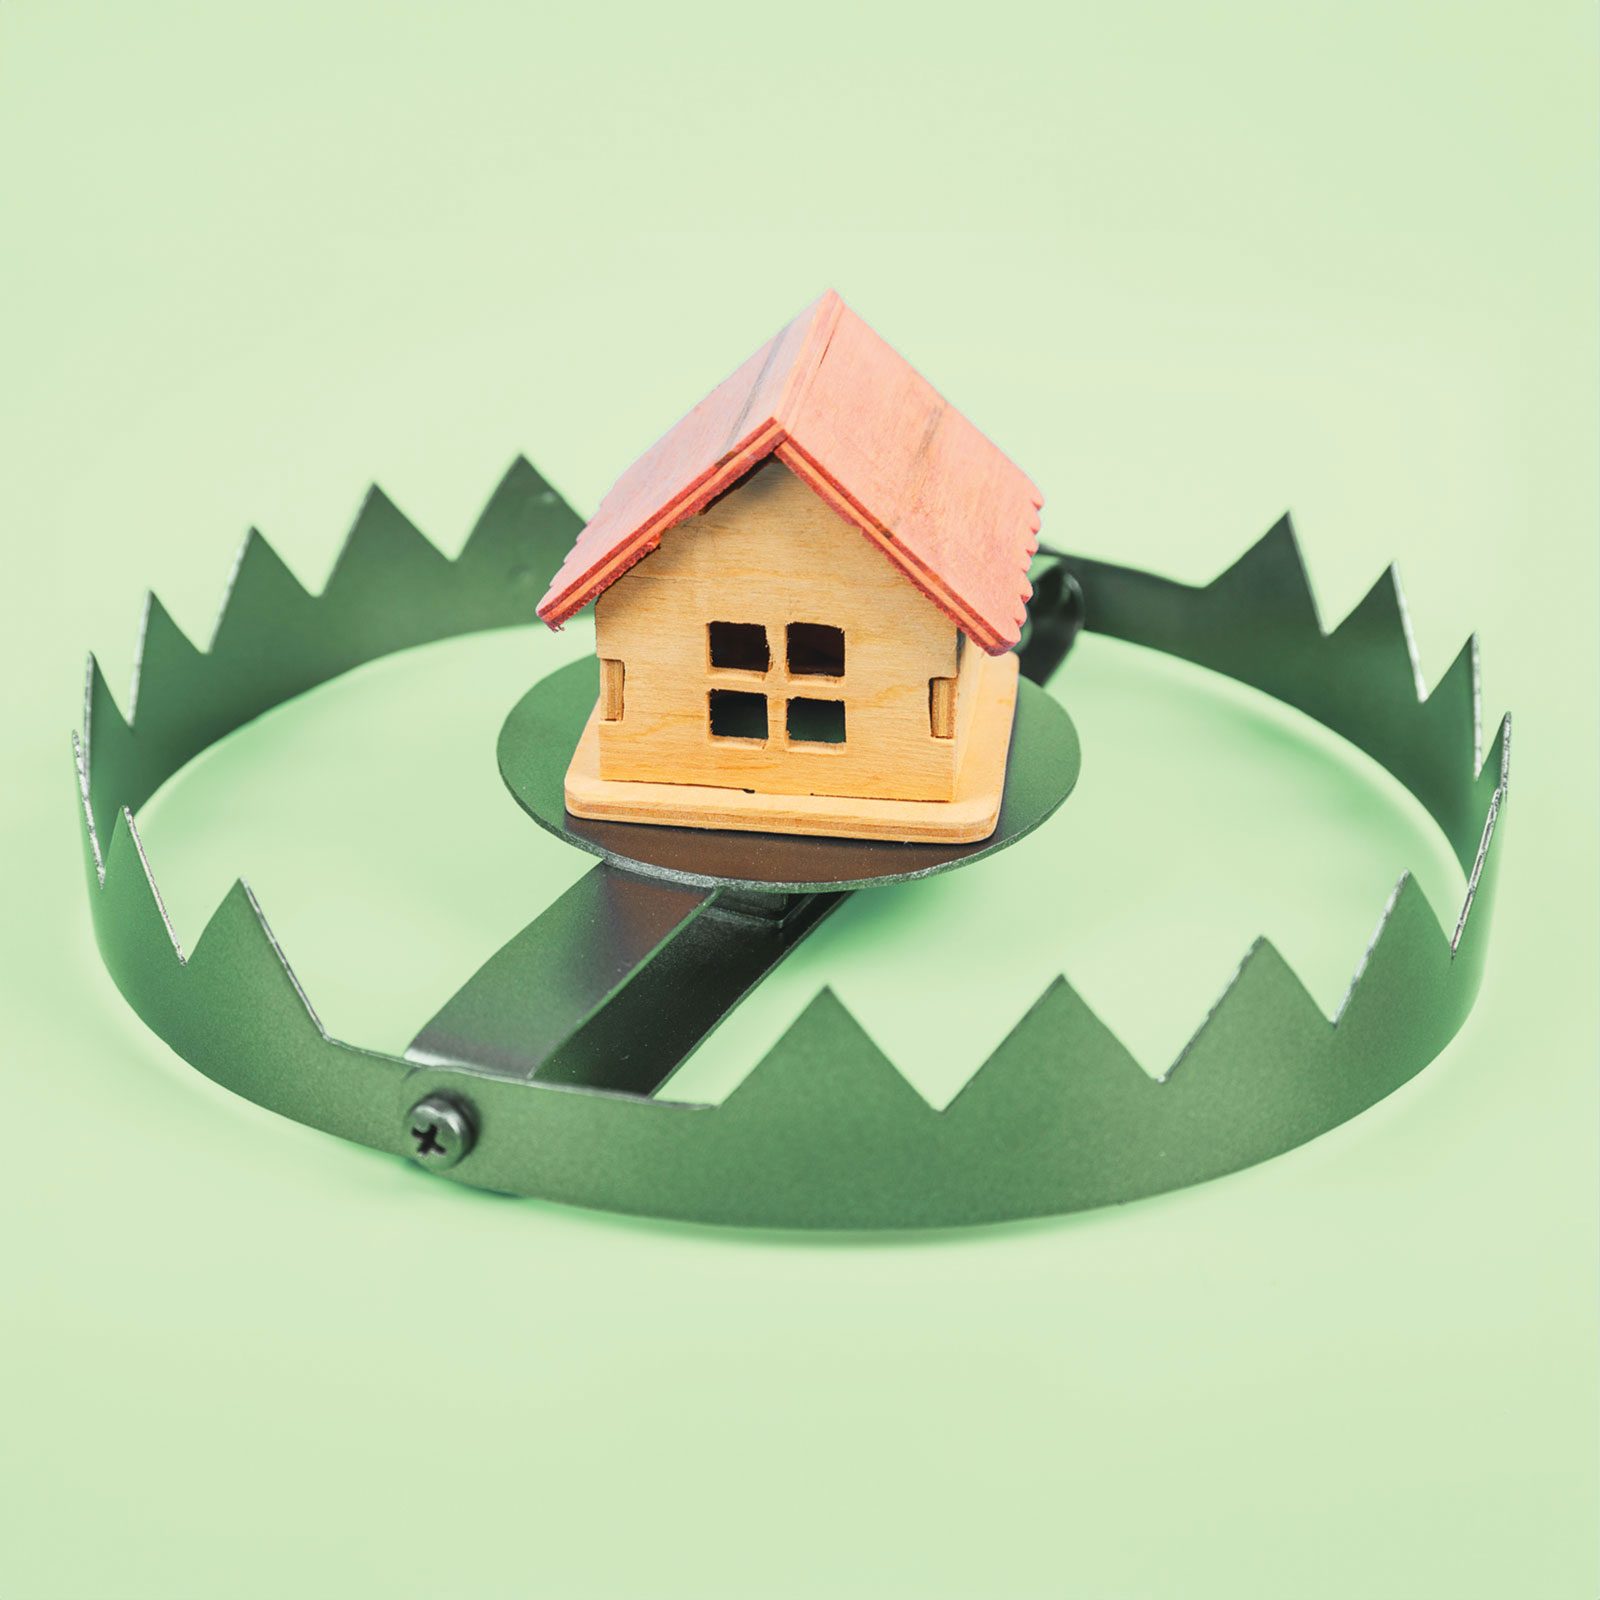 model house in a trap on a green background to represent rental scams